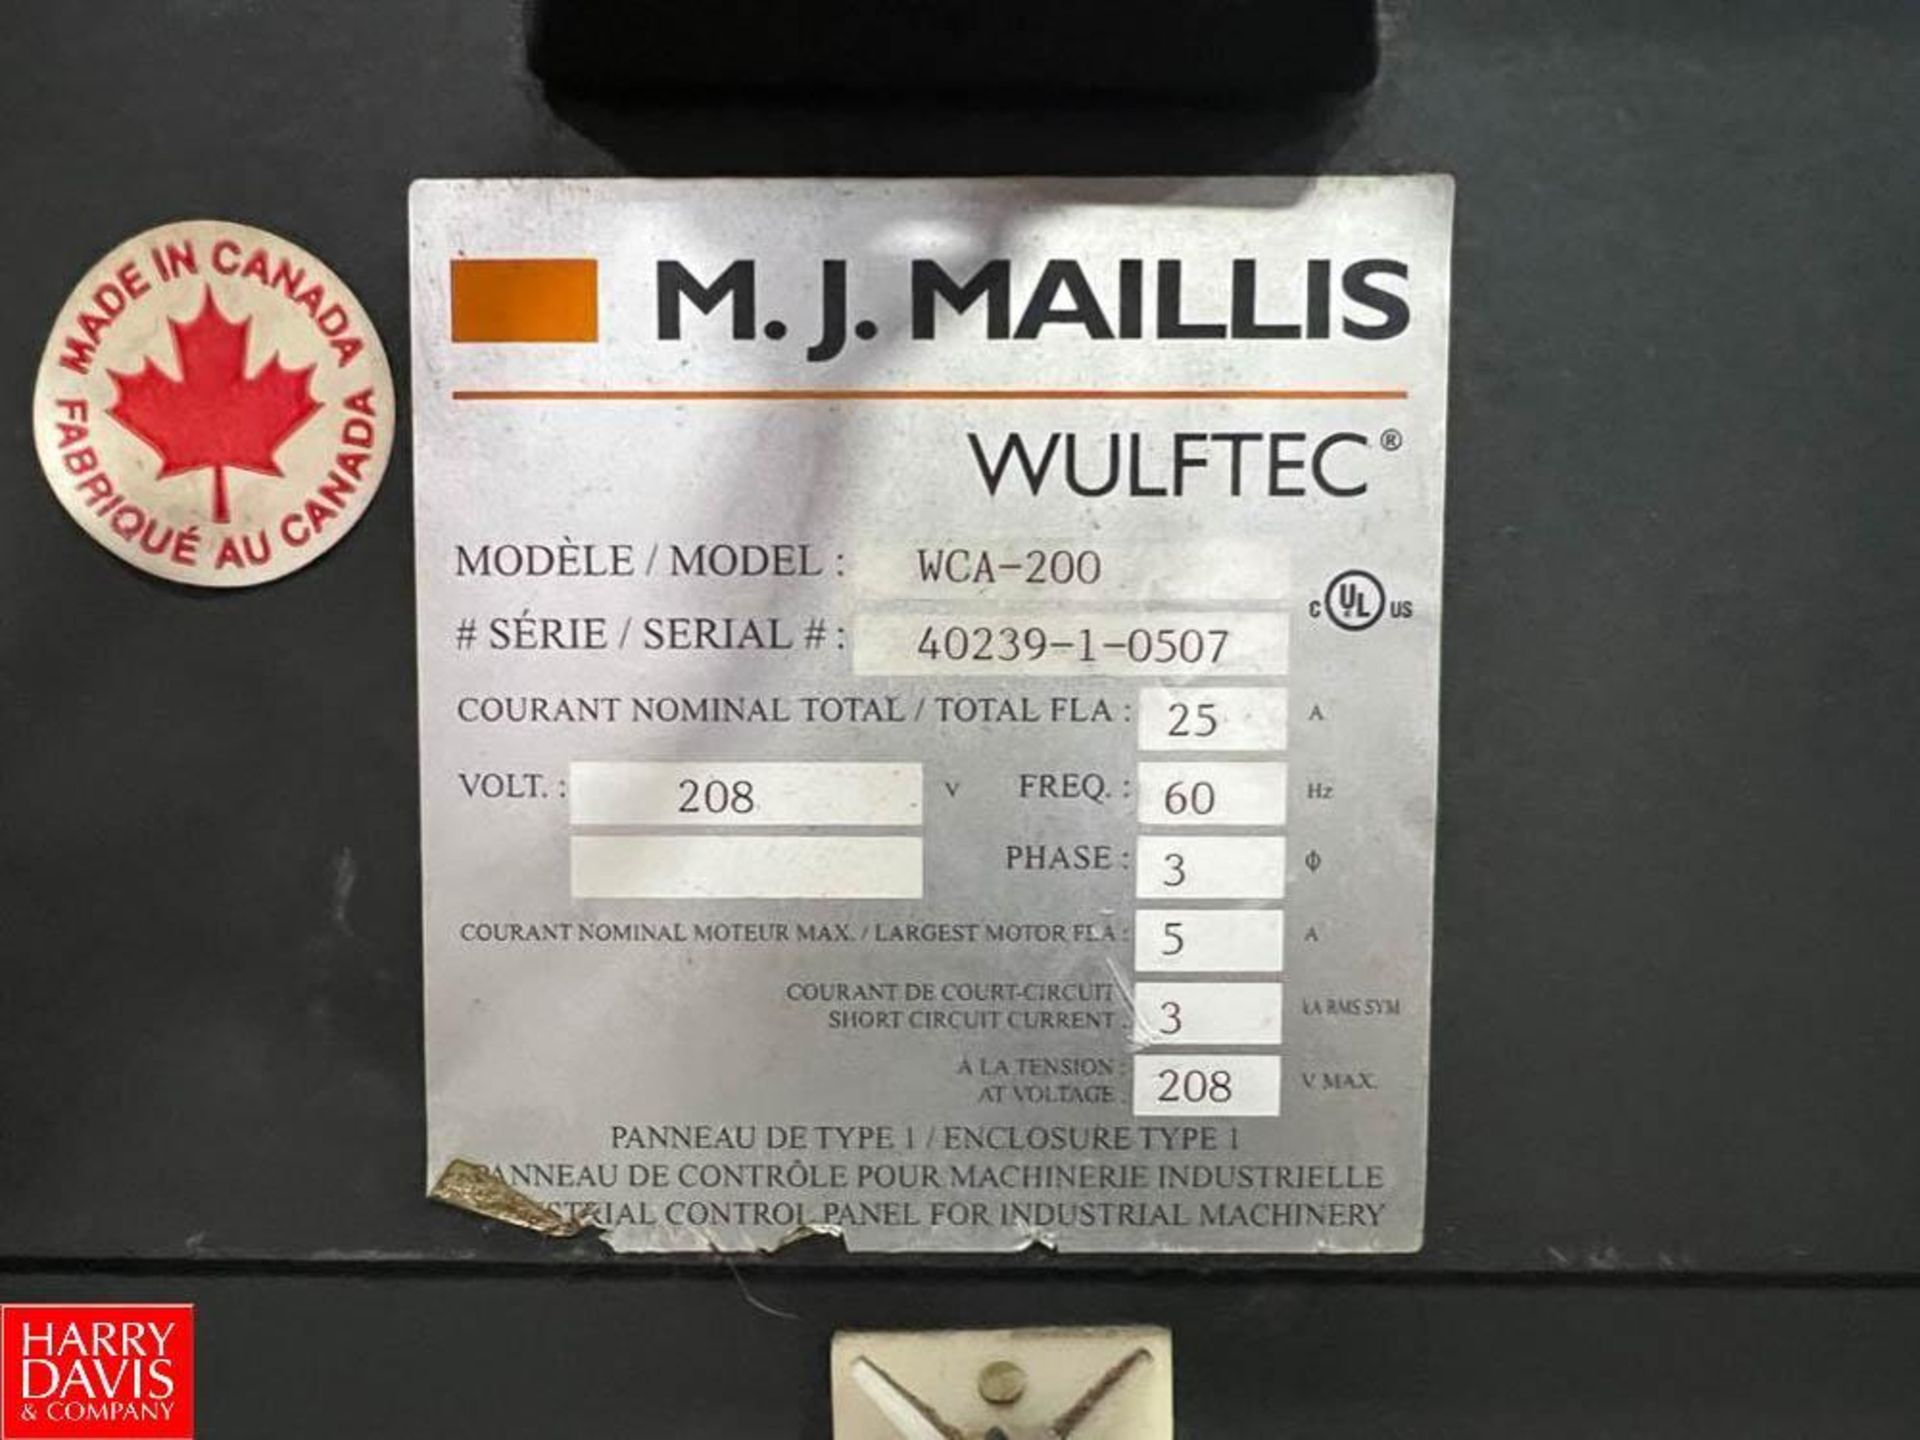 Wulftec Pallet Wrapper, Model: WCA-200, S/N: 40239-1-0507 with Allen-Bradley PanelView Plus 600 Touc - Image 6 of 8